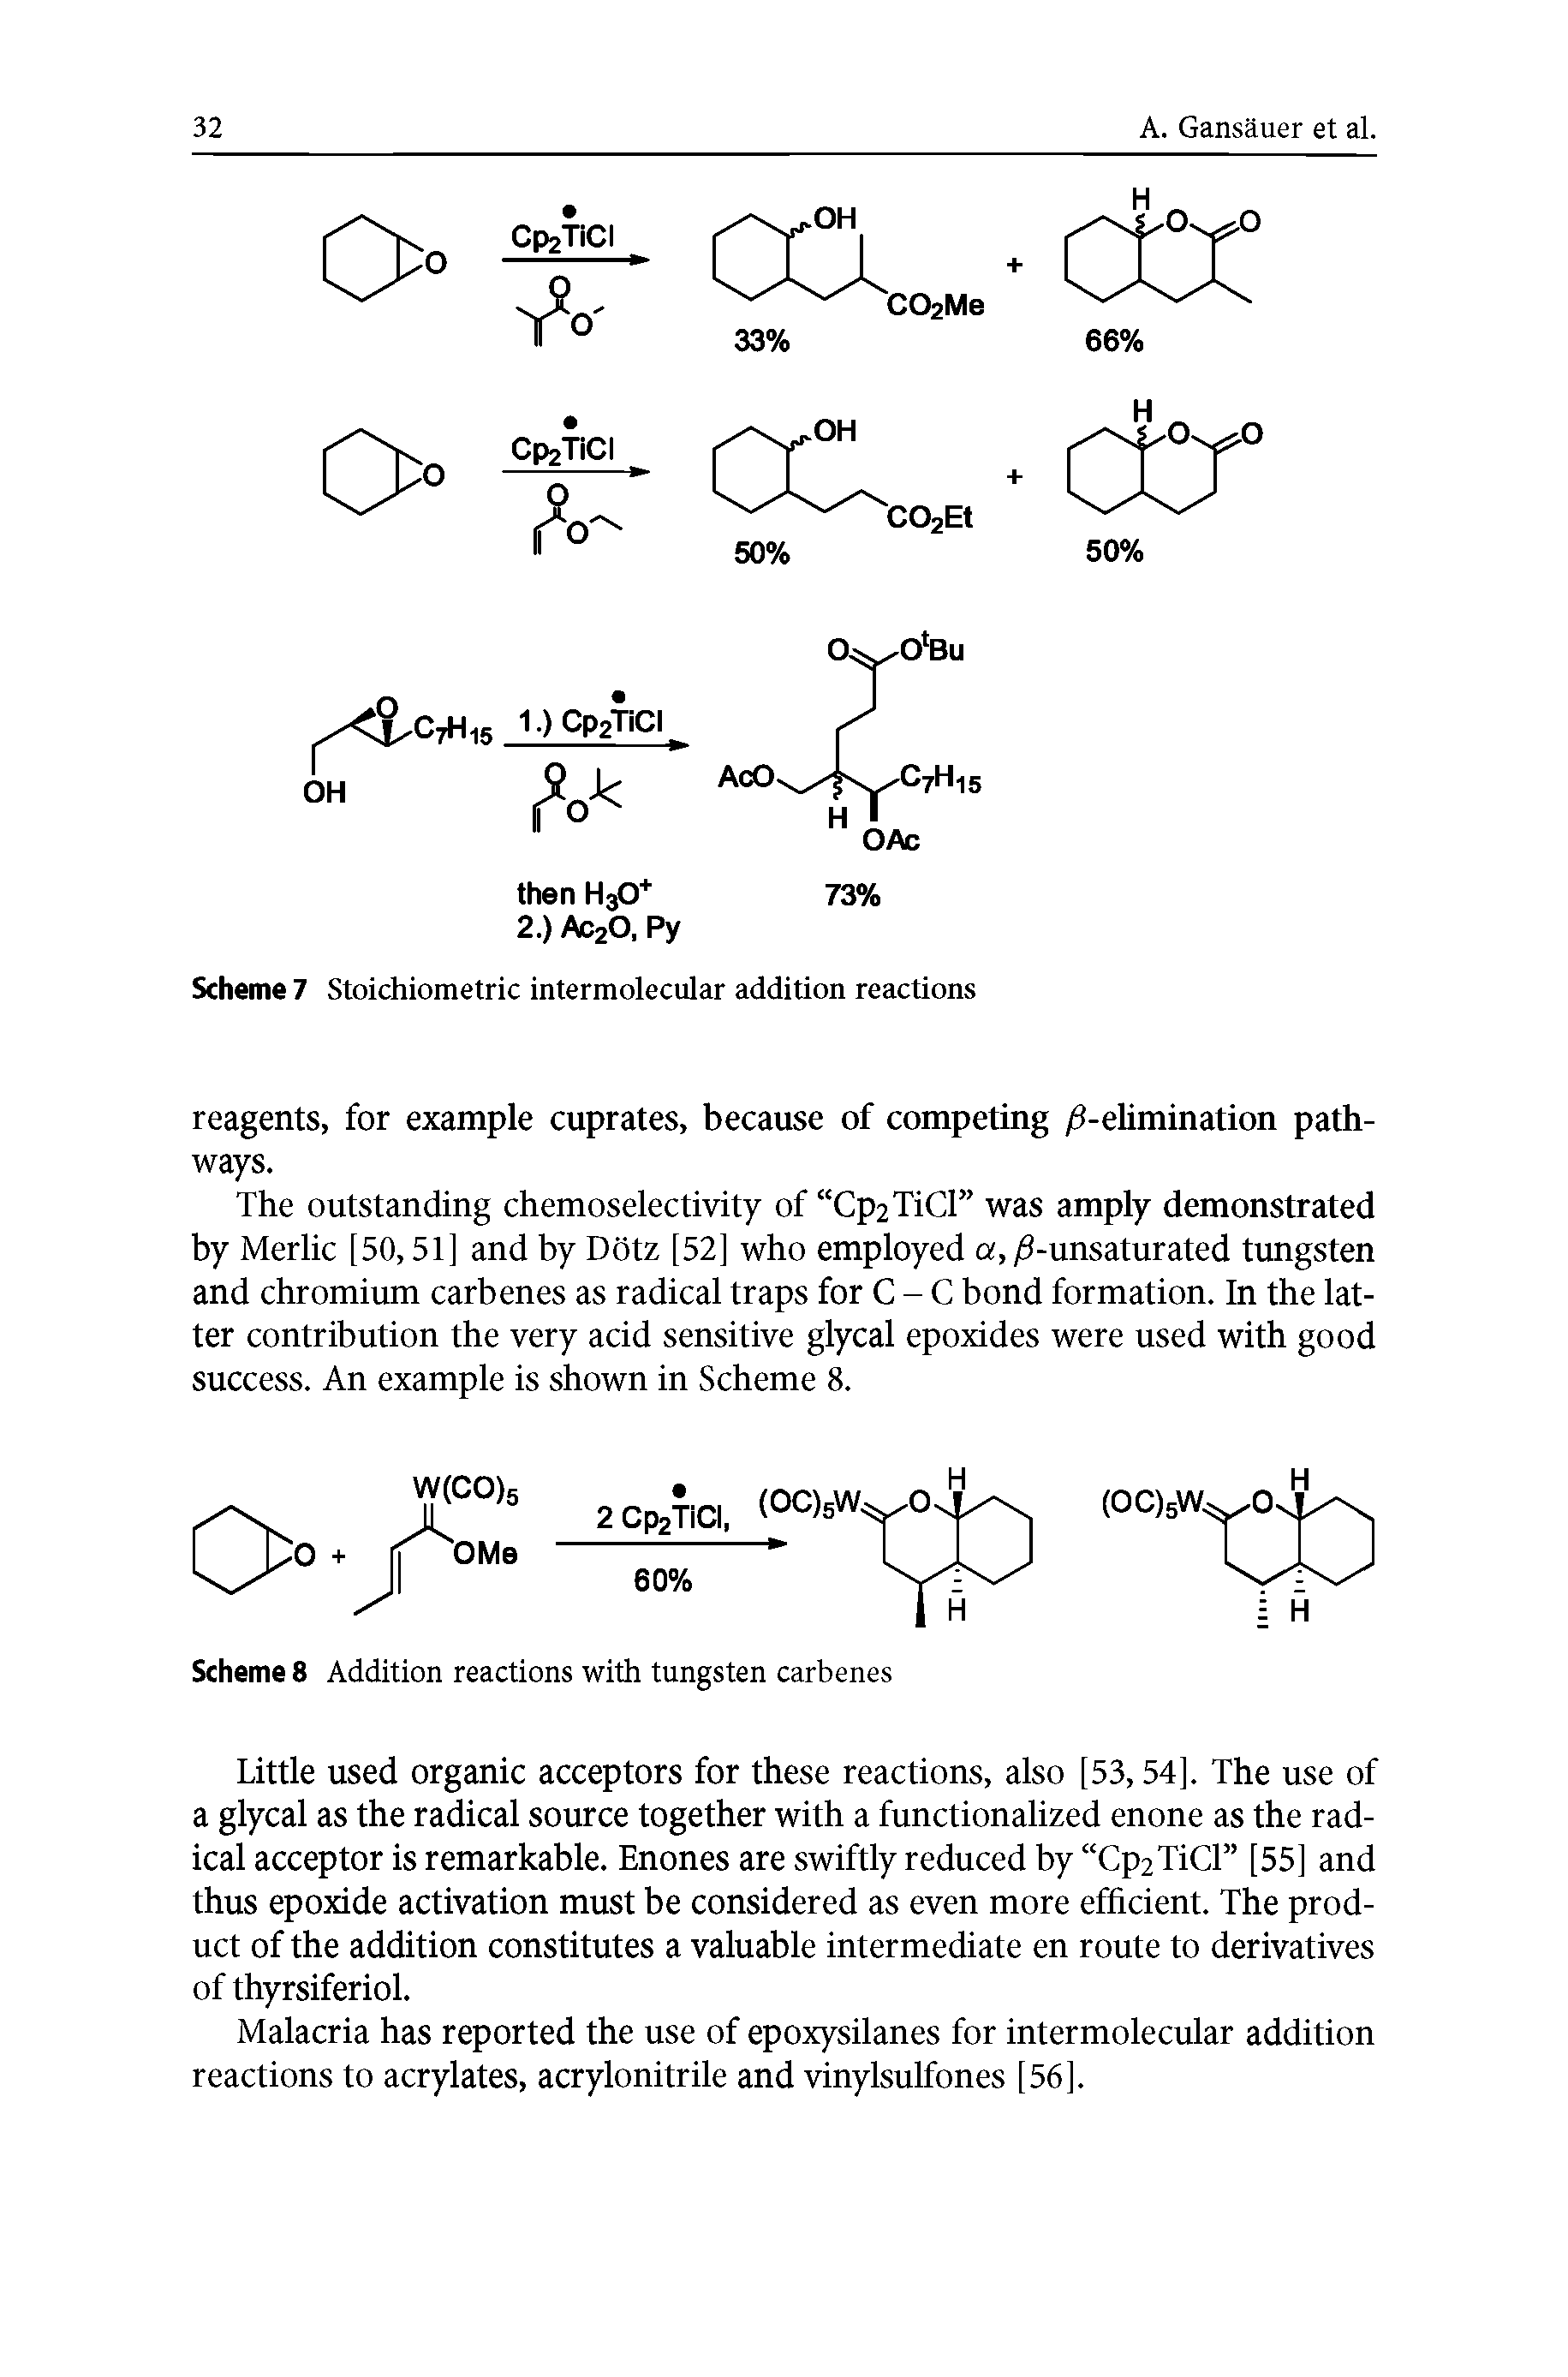 Scheme 8 Addition reactions with tungsten carbenes...